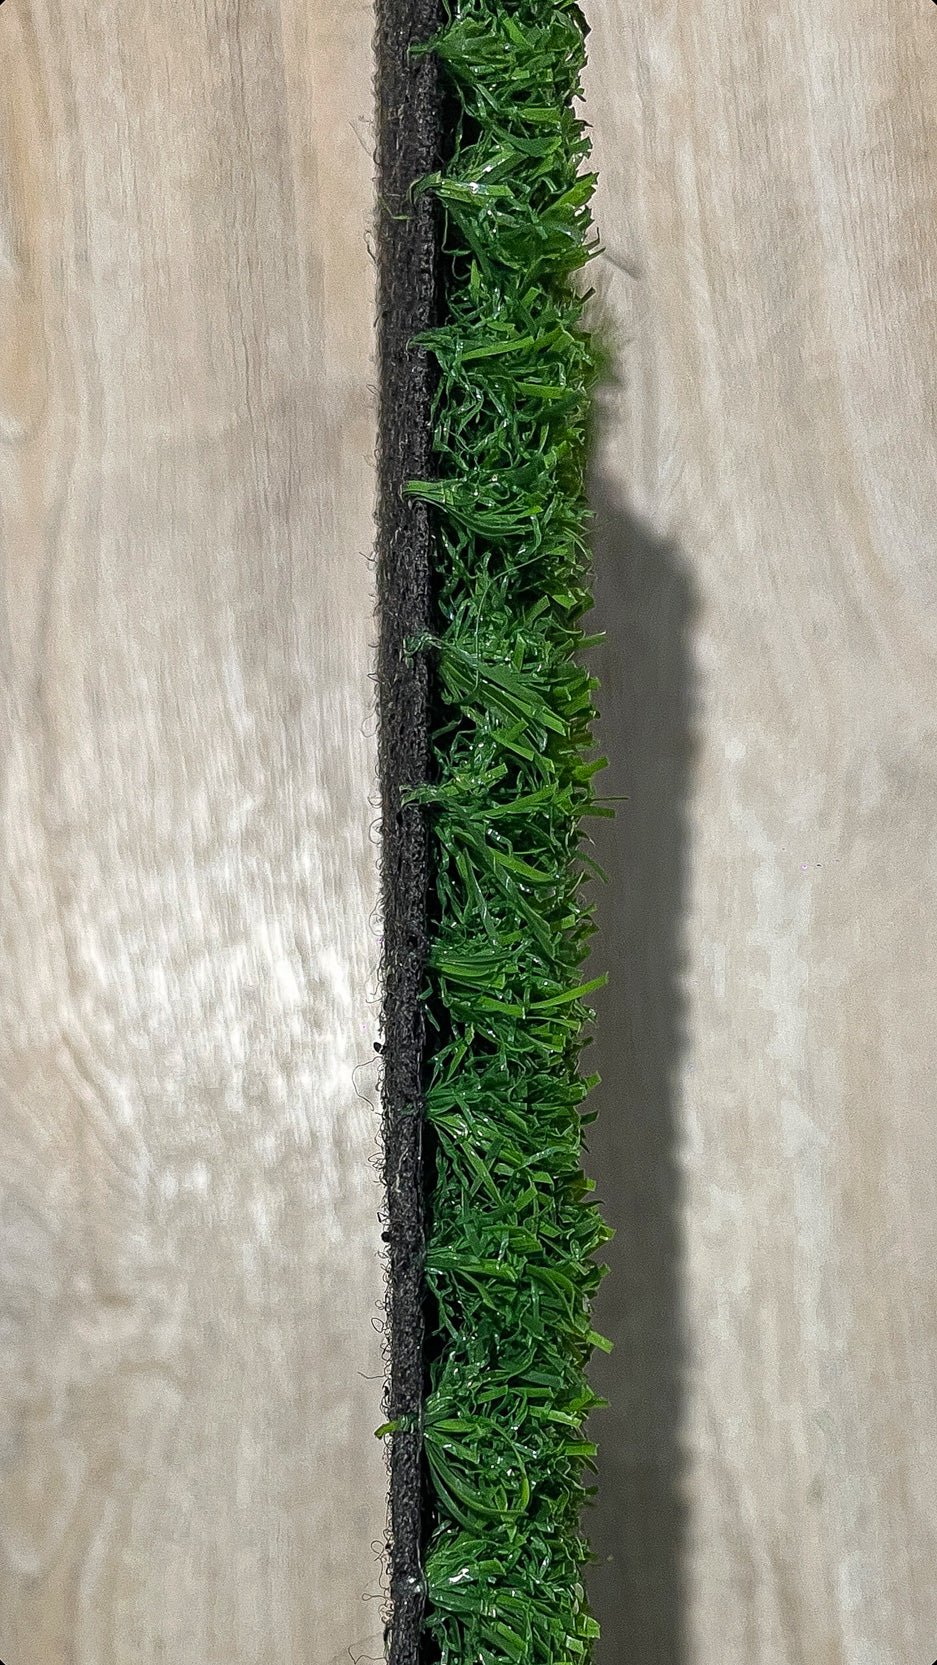 15 MM Naturals Artificial Grass for Indoor and Outdoor Use, Soft and Lush Natural Looking - V Surfaces